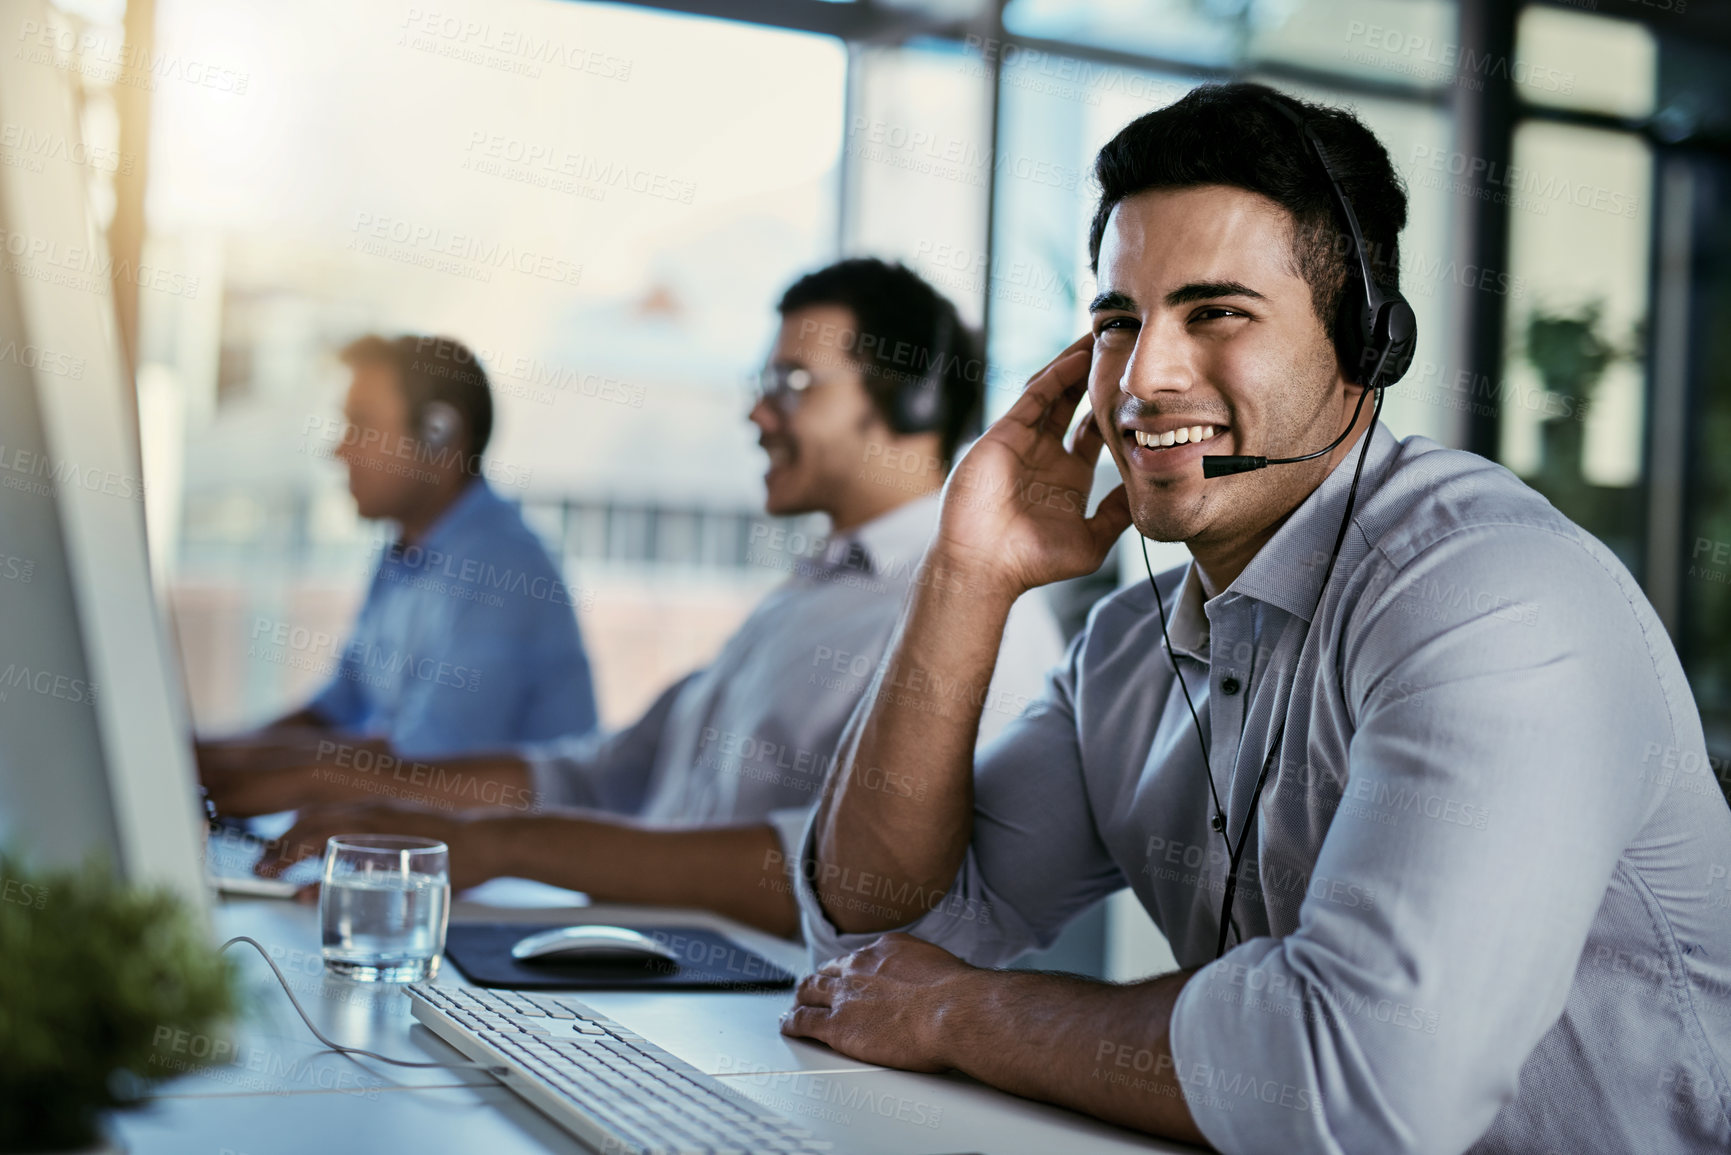 Buy stock photo Callcenter agent, smile and man in office consulting with advice, help and happiness at desk. Happy phone call, conversation and service, customer support consultant speaking on headset at crm agency